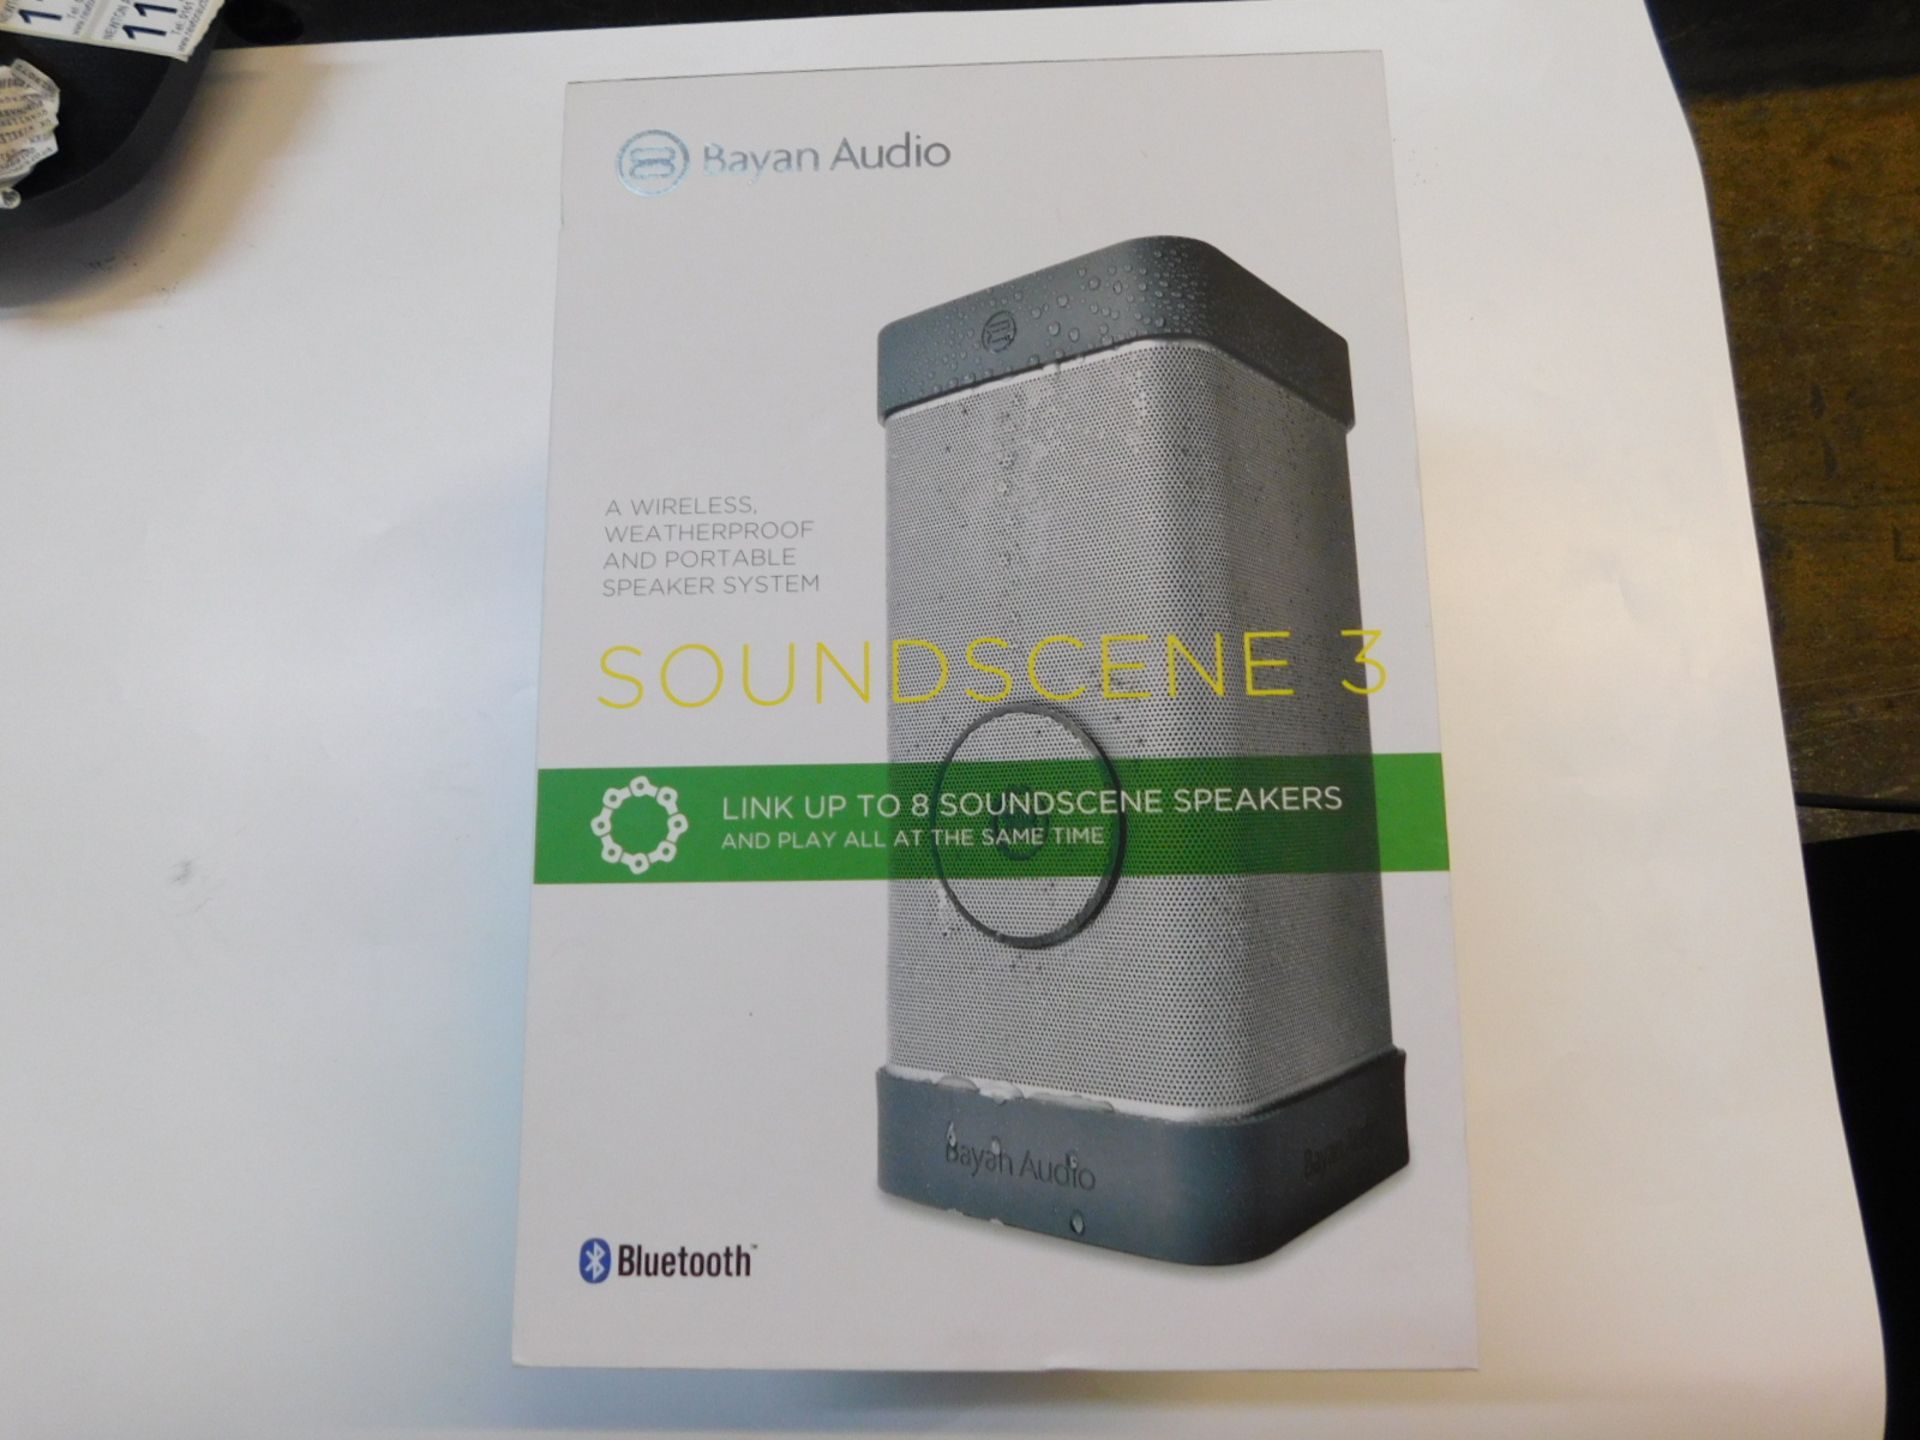 1 BOXED BAYAN AUDIO SOUNDSCENE 3 WIRELESS AND PORTABLE SPEAKER SYSTEM RRP Â£229